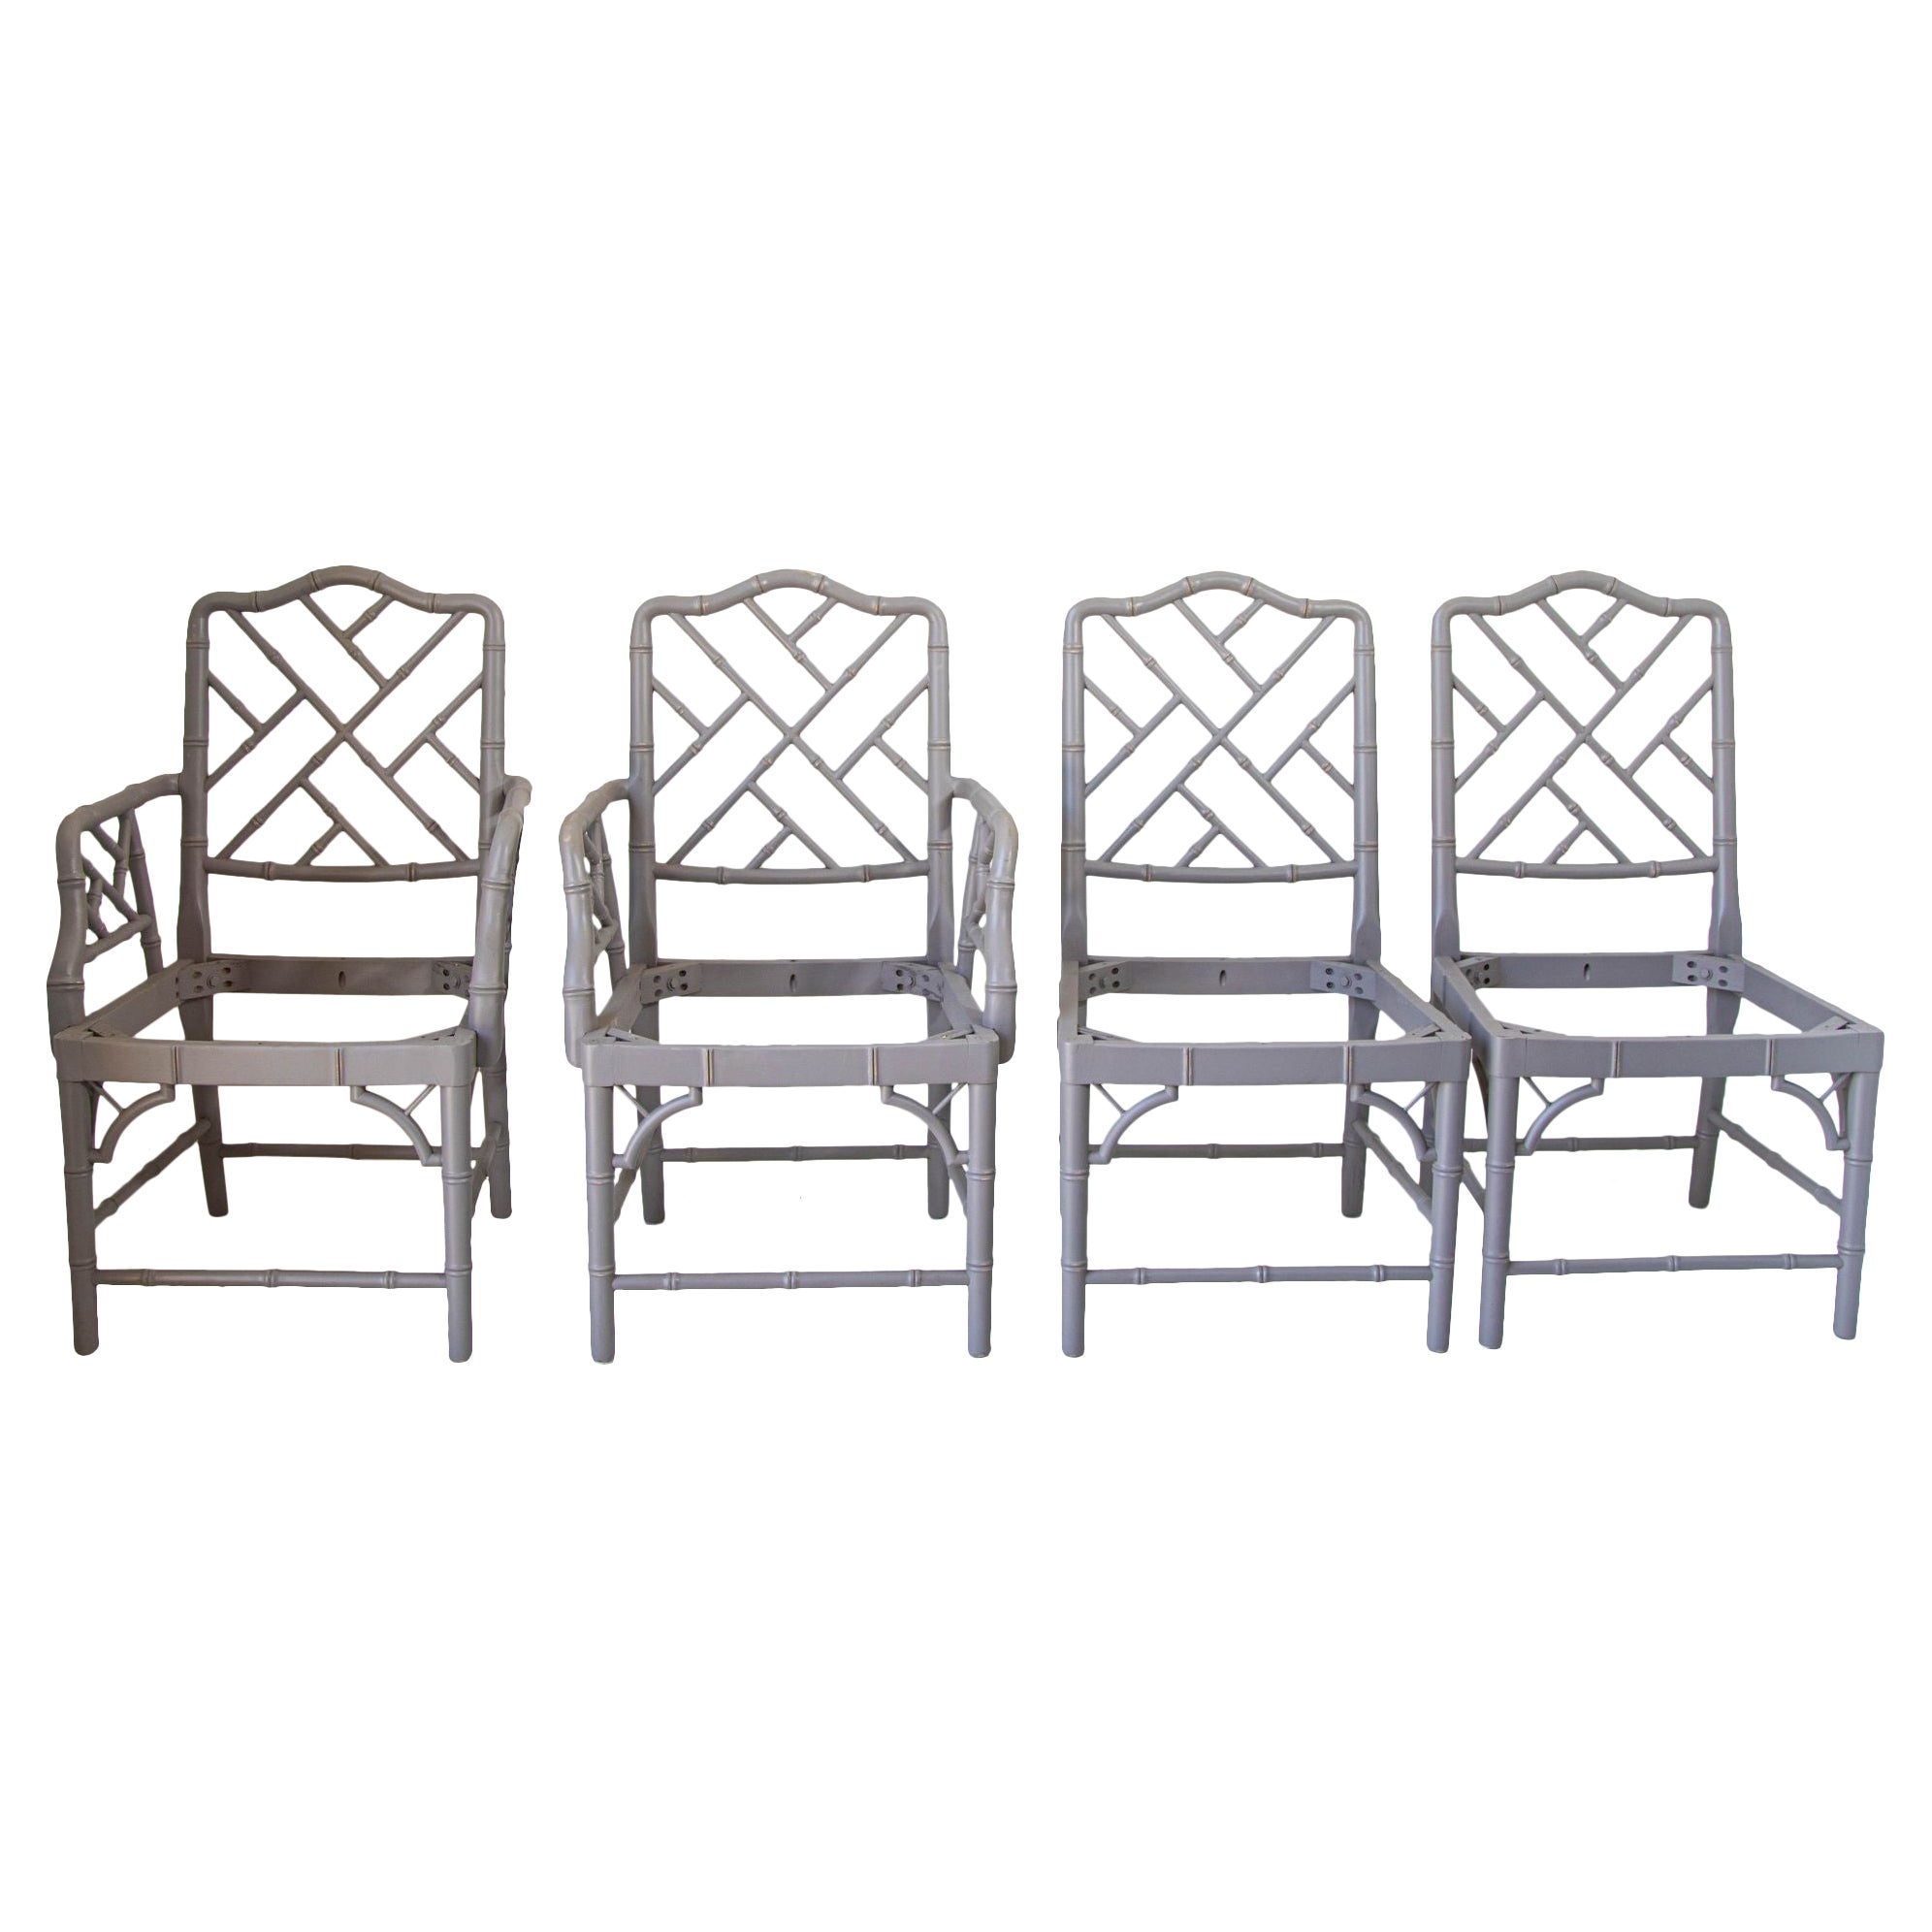 Chinese Chippendale Faux Bamboo Chairs Jonathan Adler Style Set of Four For Sale